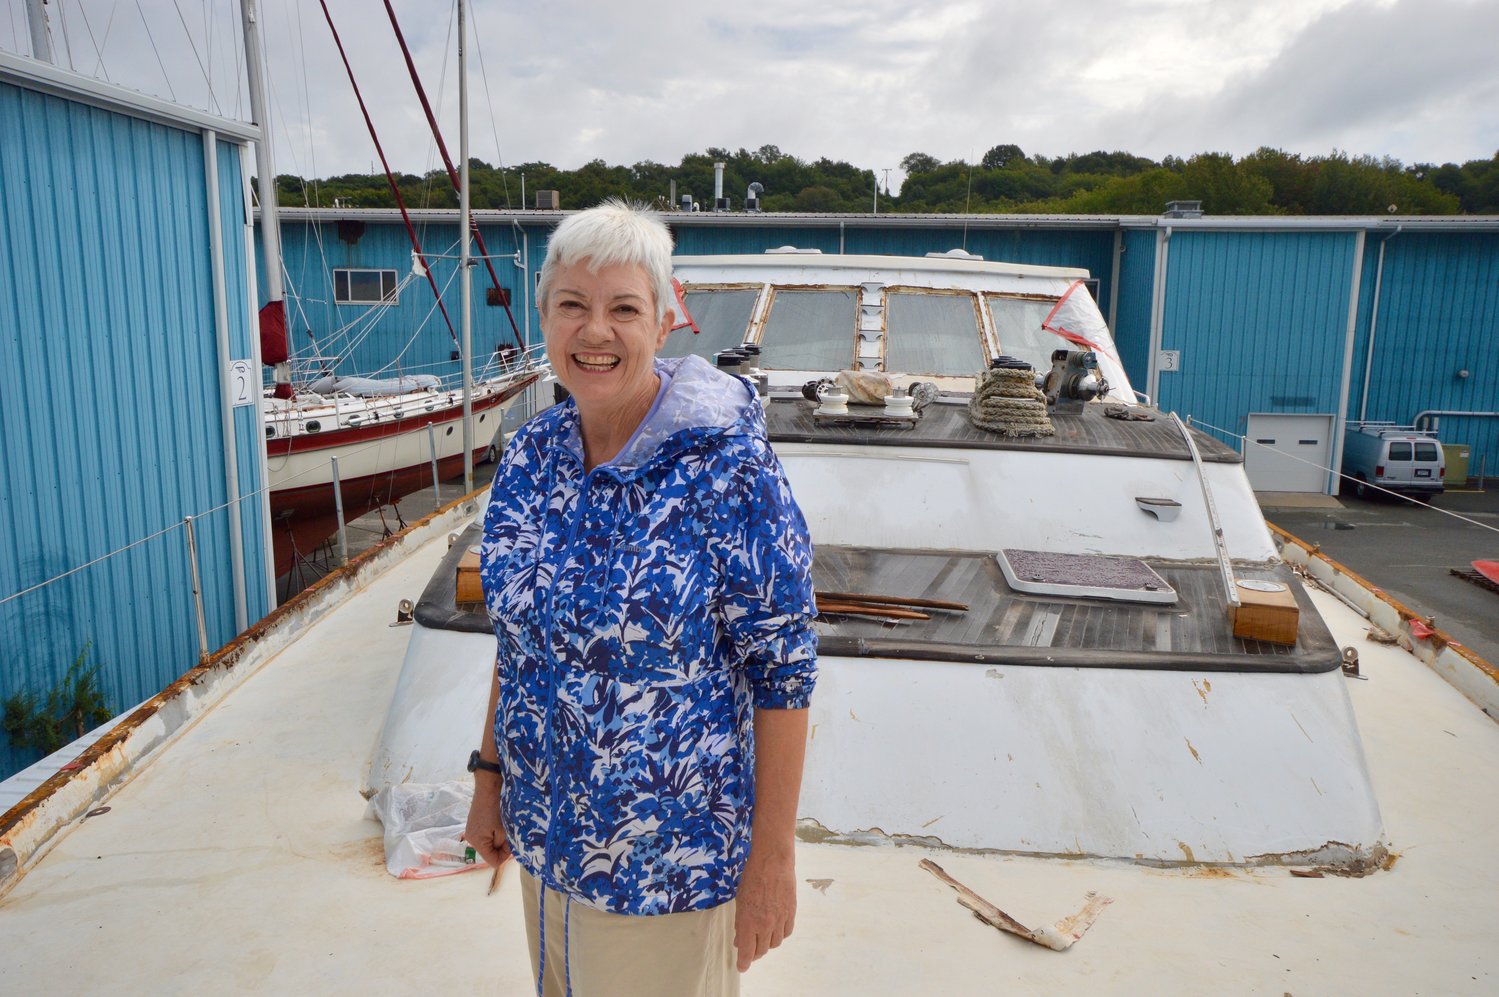 “Part of the goal is to champion the youth — that they can actually make a difference,” said Capt. Ann Ford of Youth With a Mission, here on the deck of the 98-foot, sloop-rigged Pacific Star, which is being restored at Hinckley Boat Yard for a mission trip to Micronesia later this year.